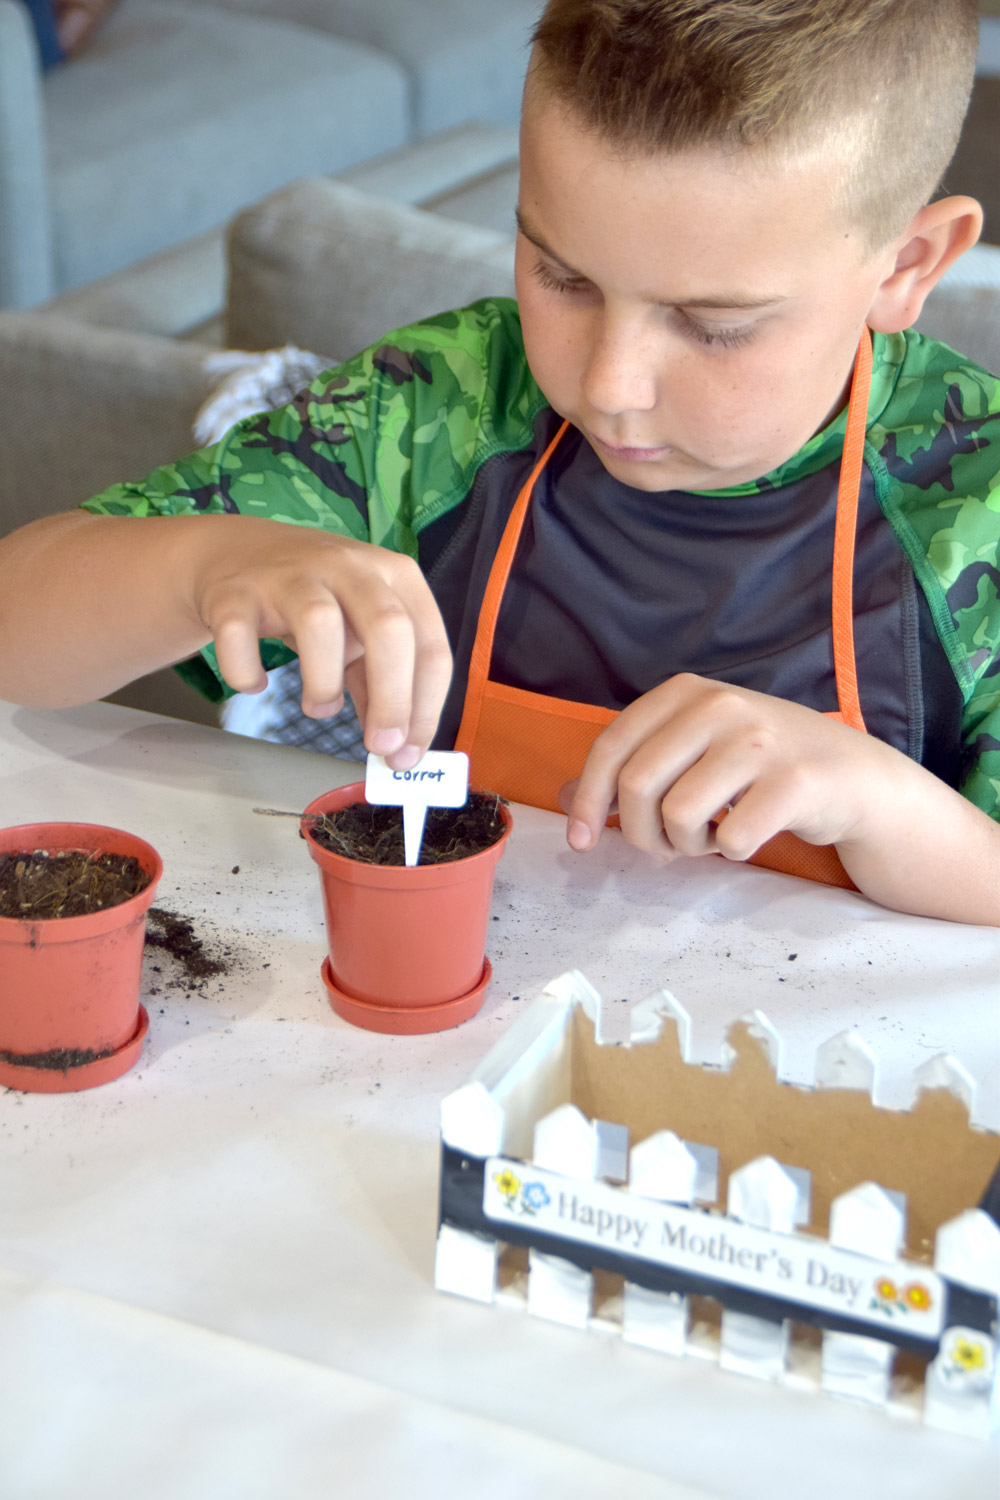 A boy placing a plant label into a small pot with soil.